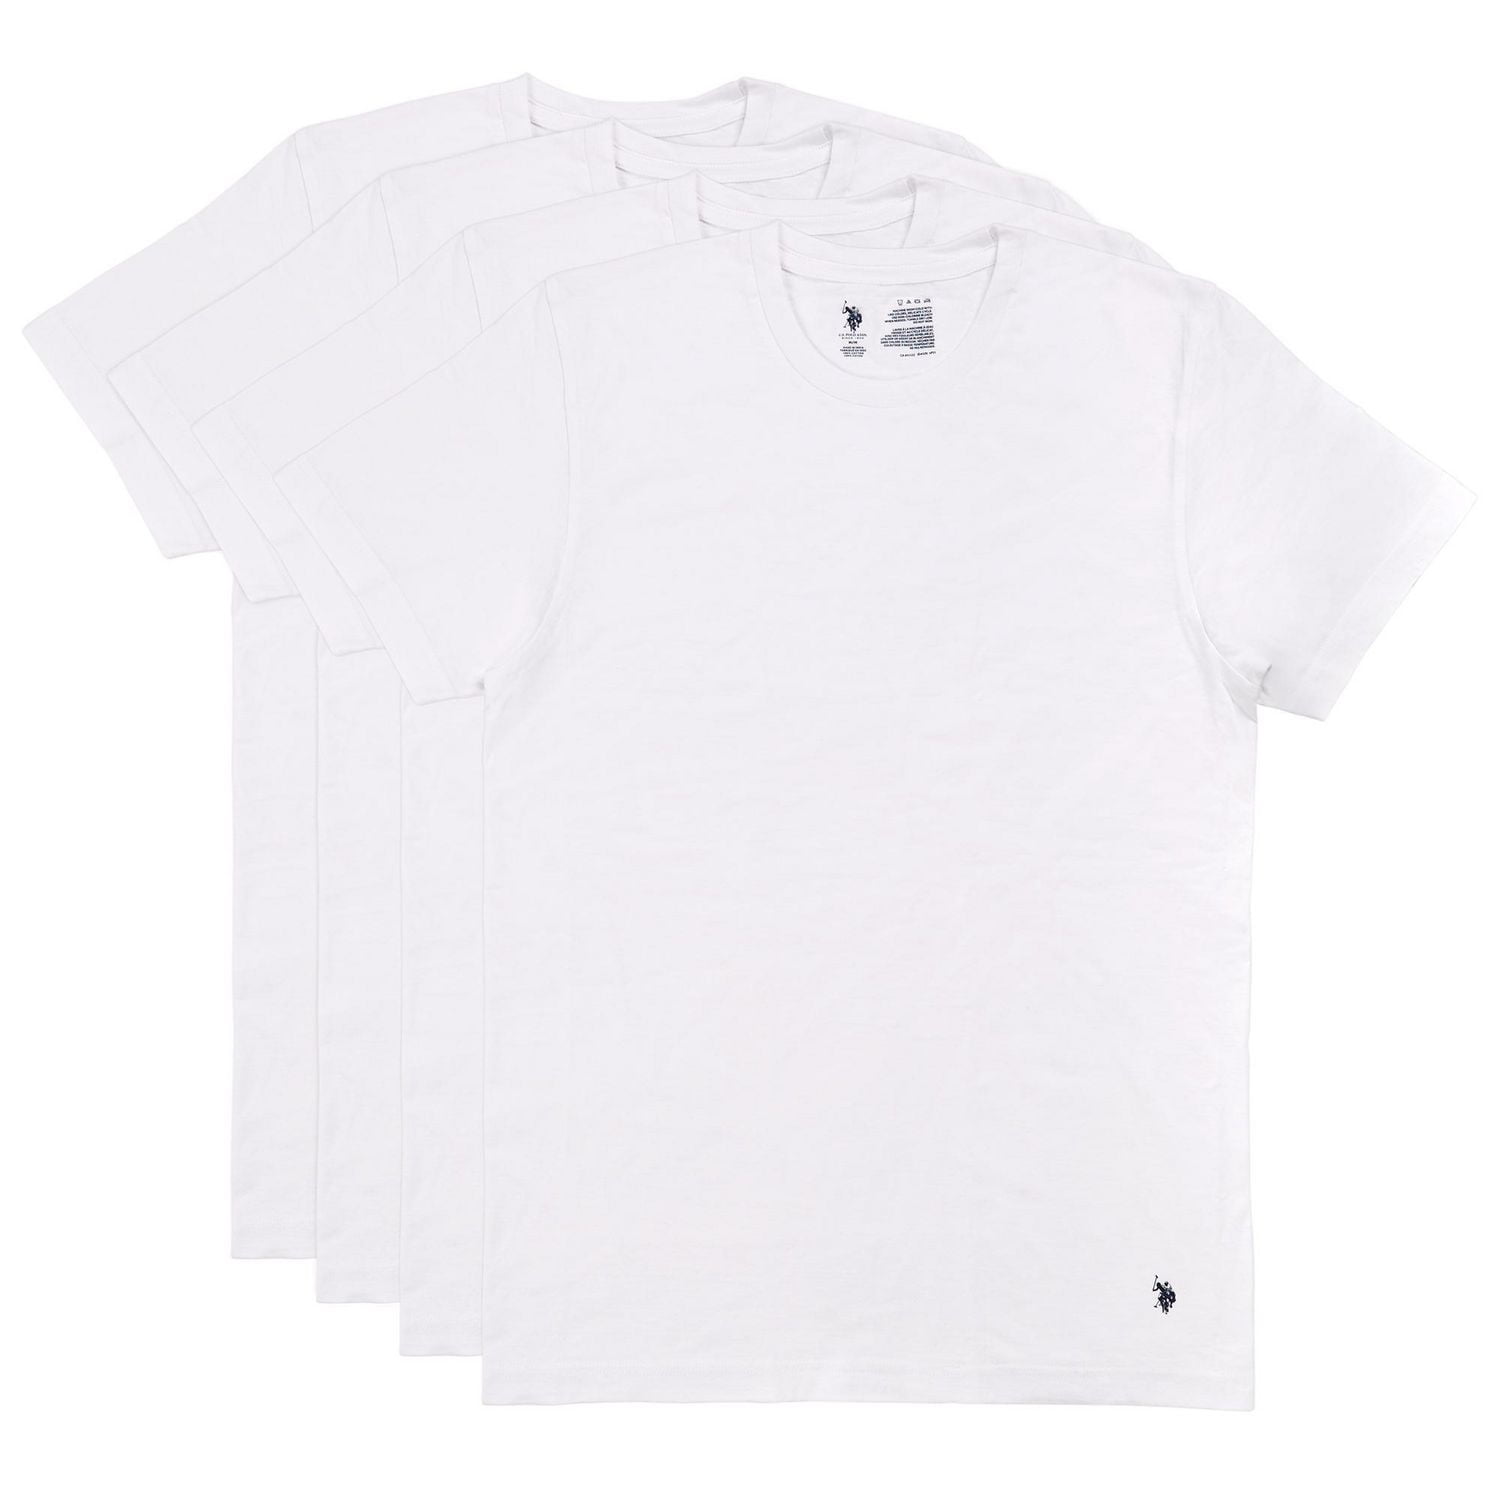 U.S. POLO ASSN. 4 Pack Crew Tees, Size S-XL 